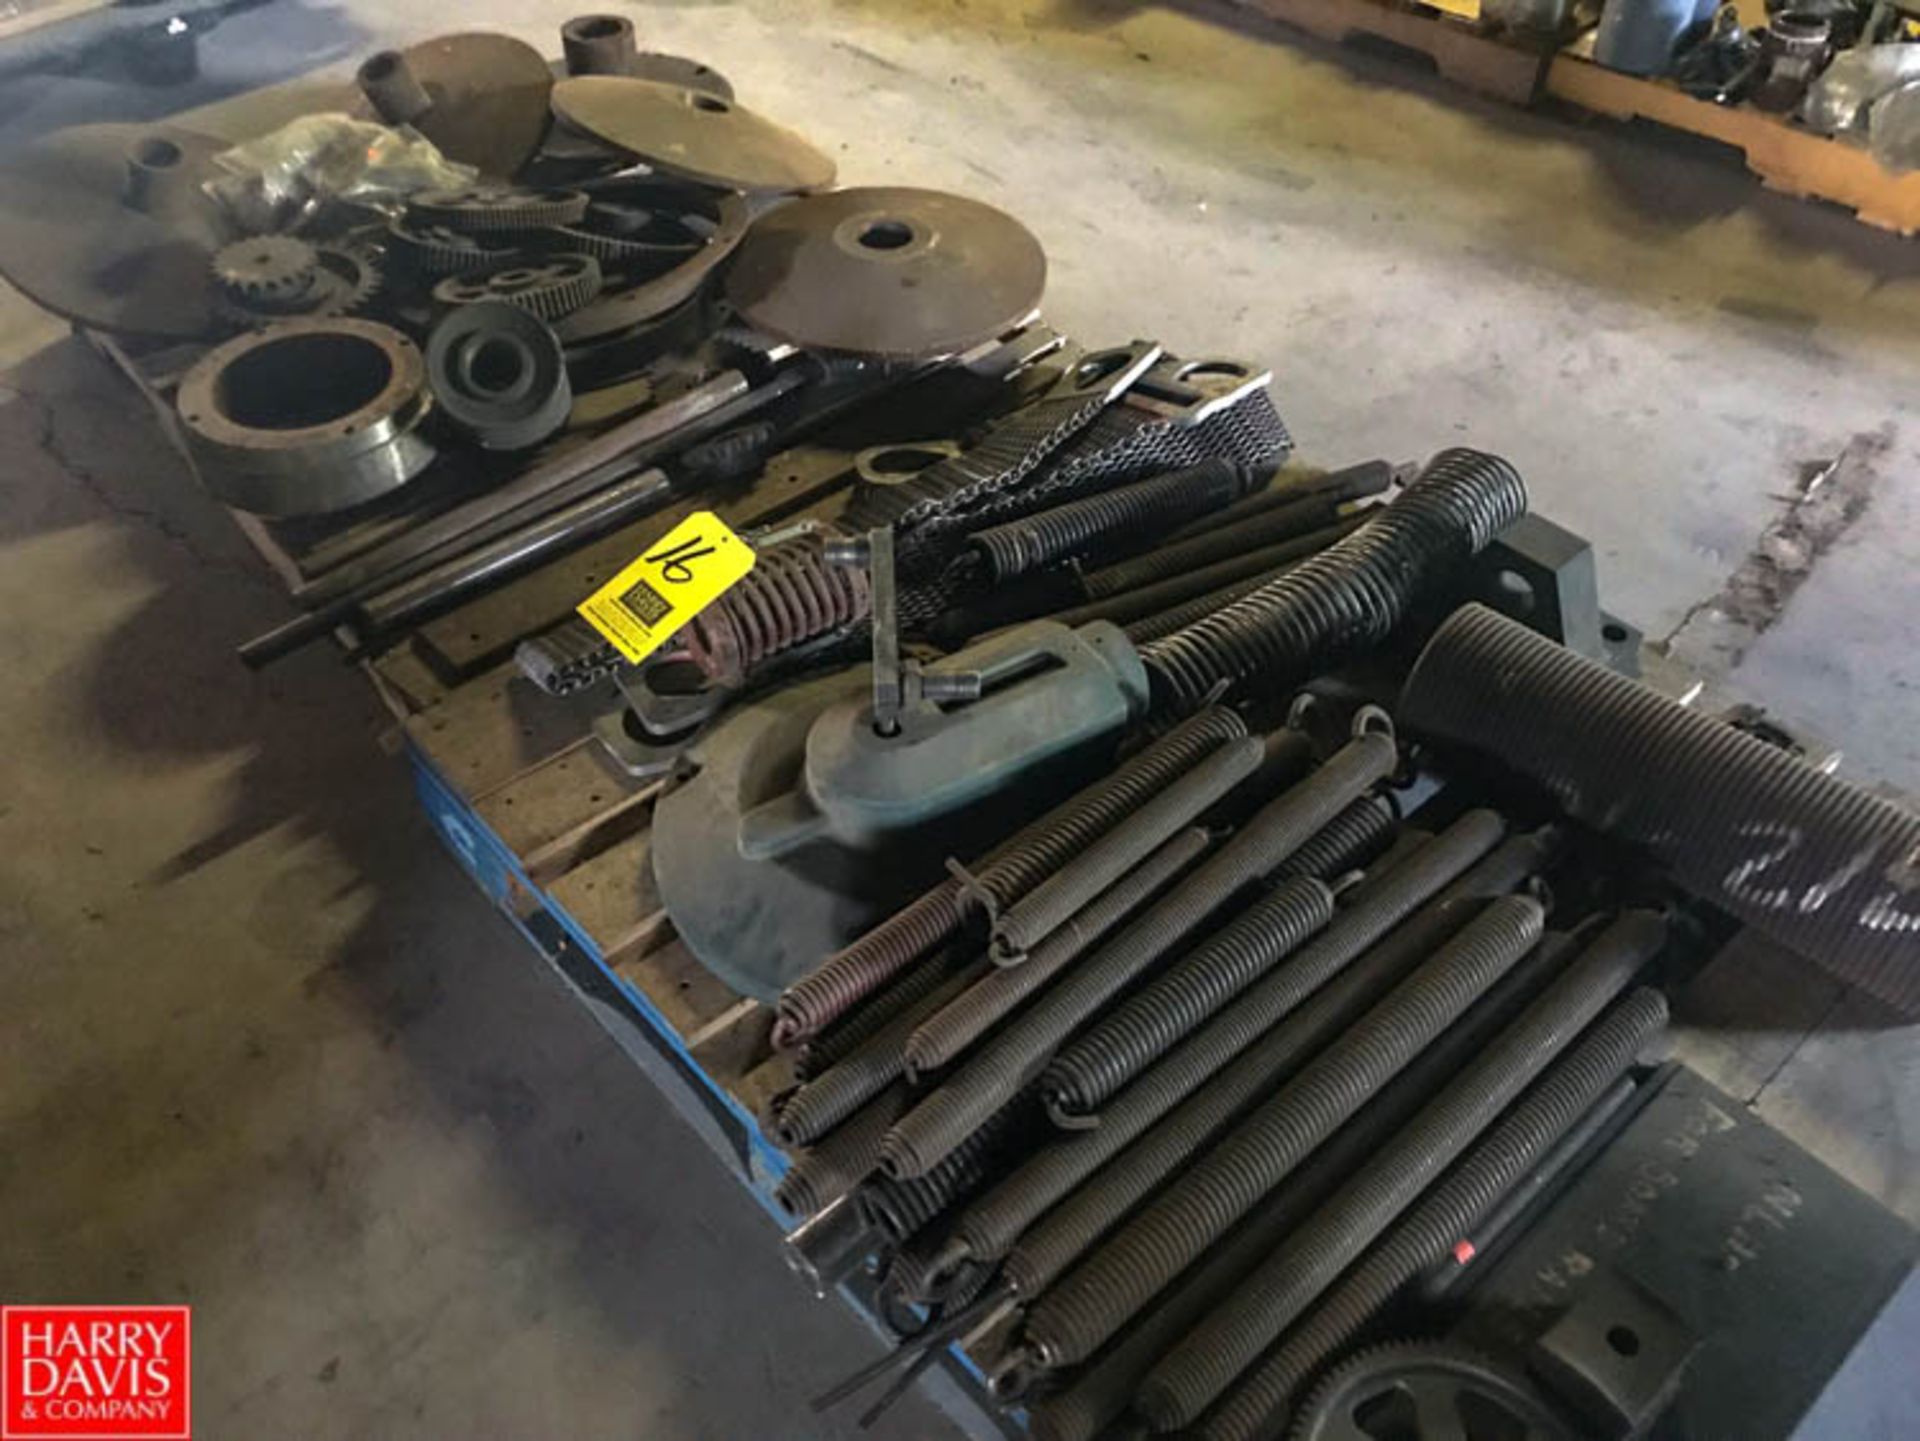 Assorted Springs, Sprockets and Hardware Rigging Fee: $ 25